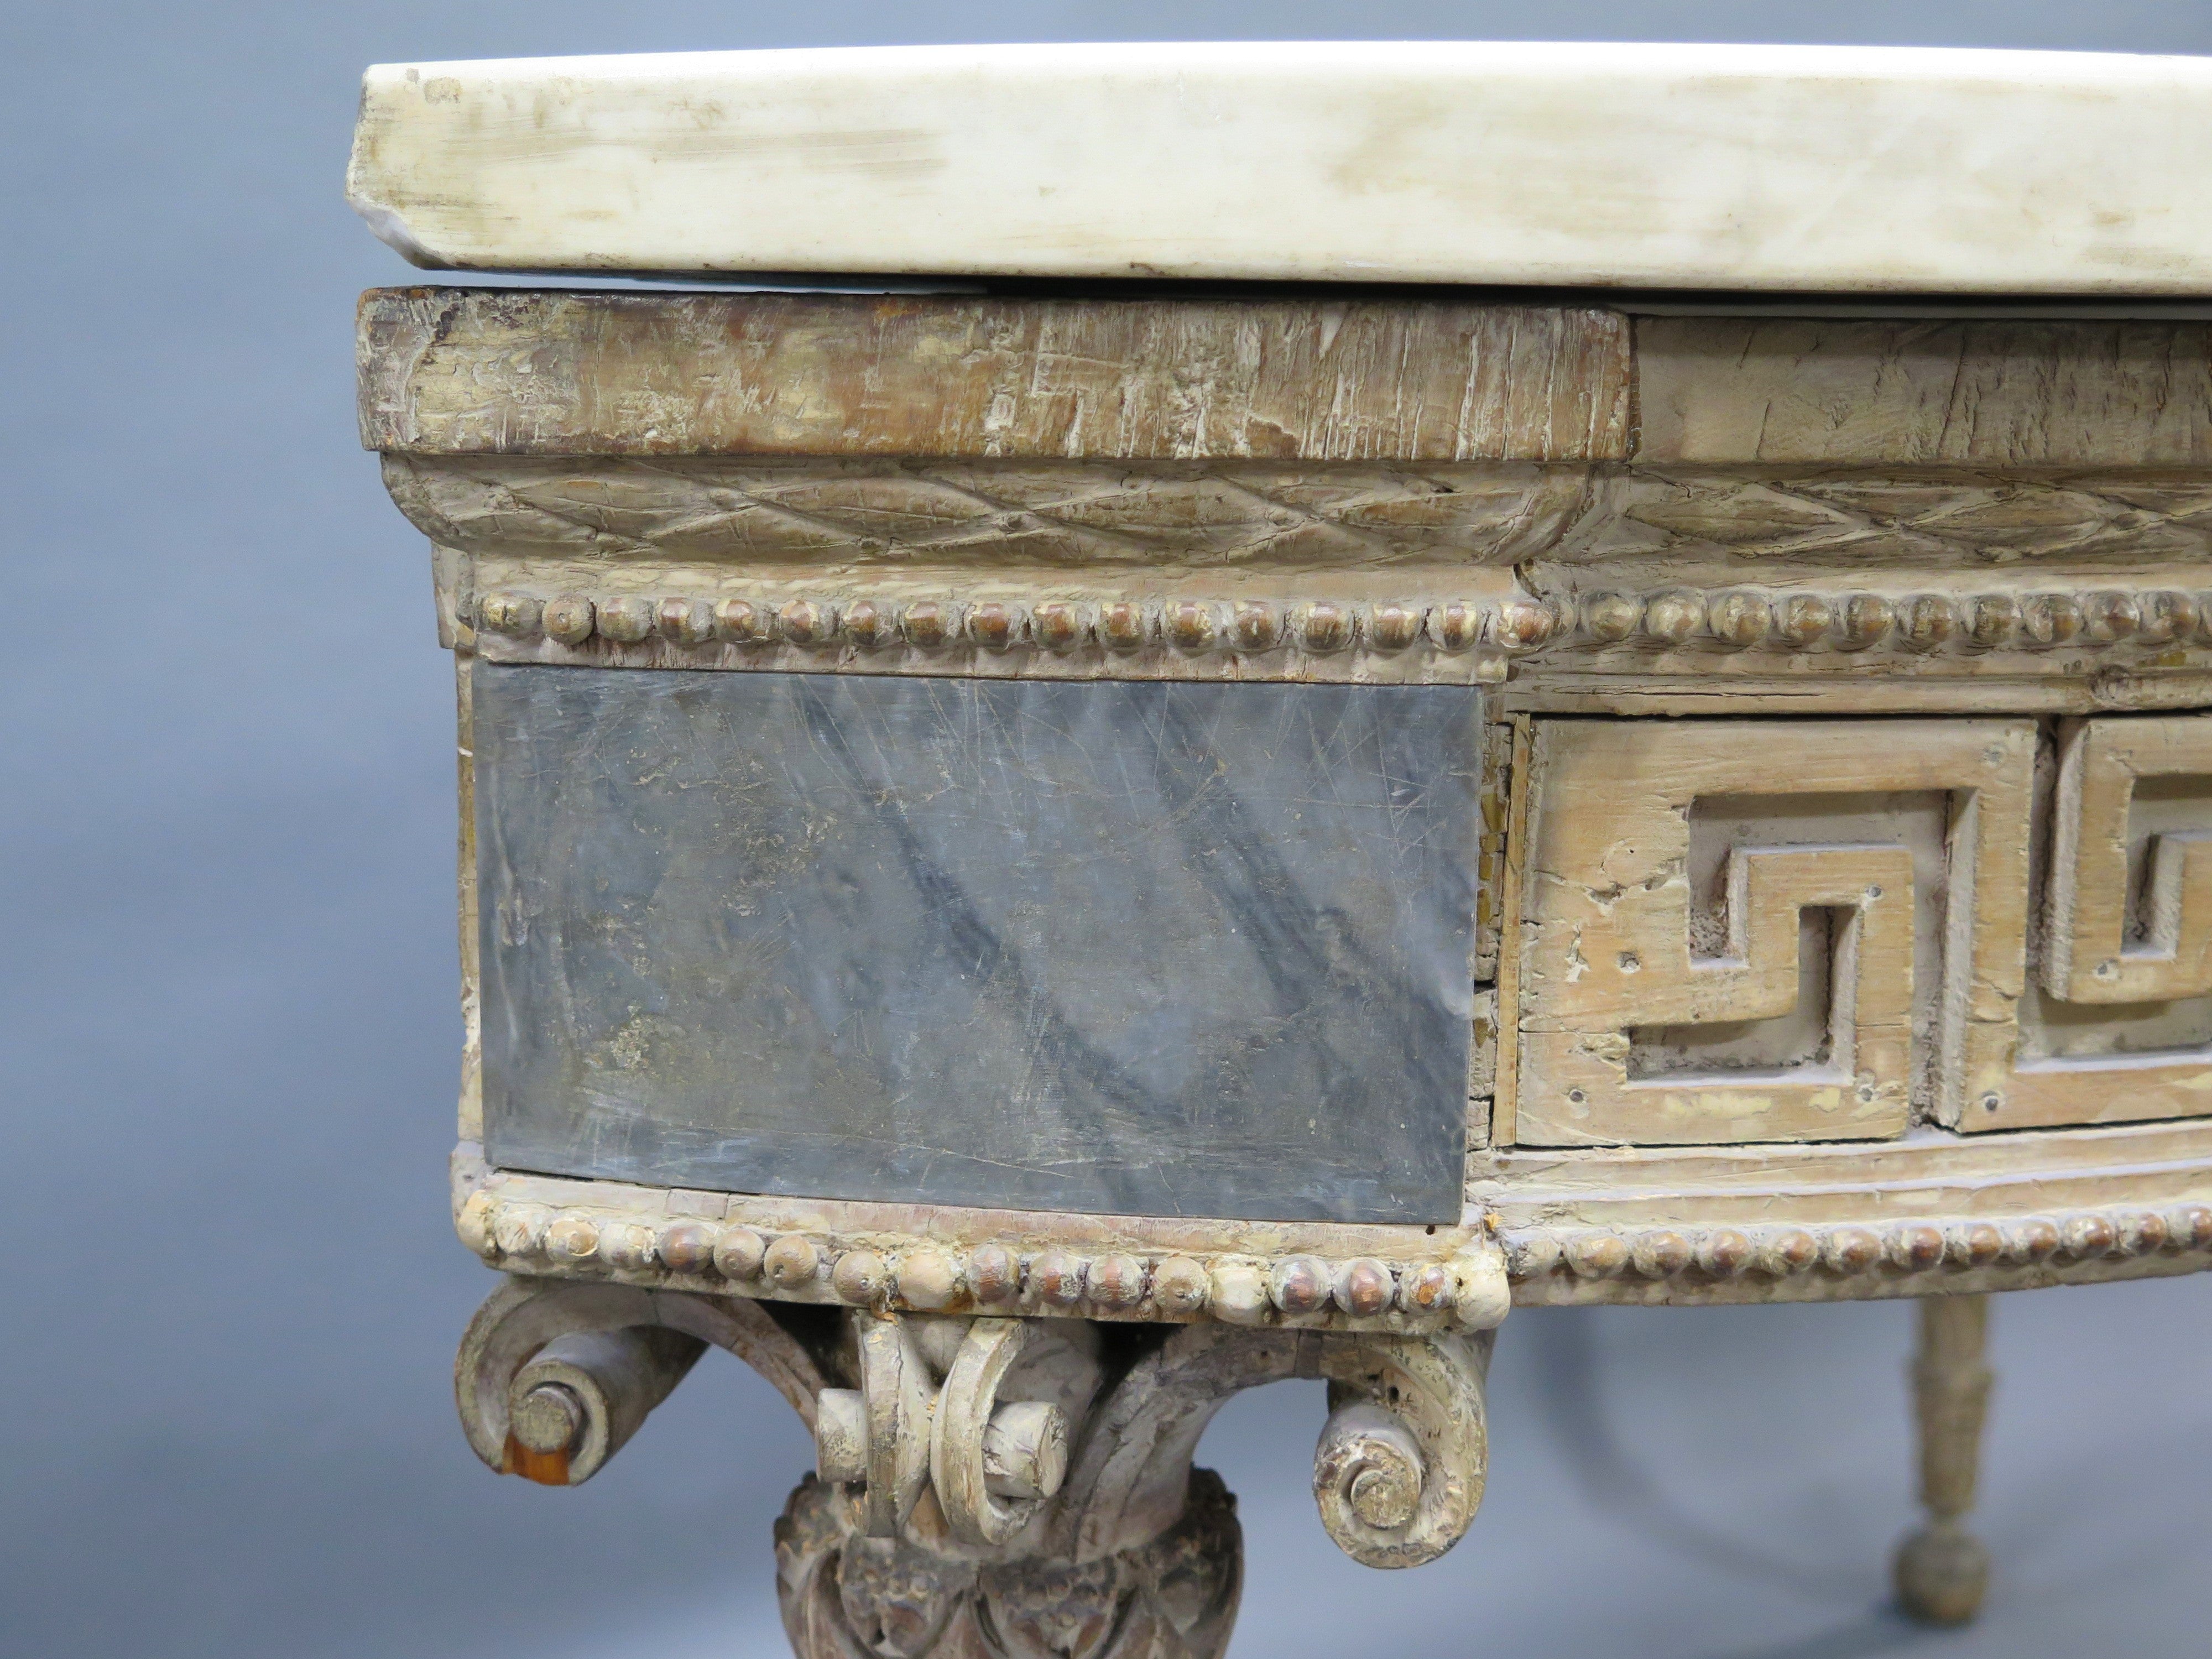 Piedmontese Side Table / Console with Marble and Scagliola Top